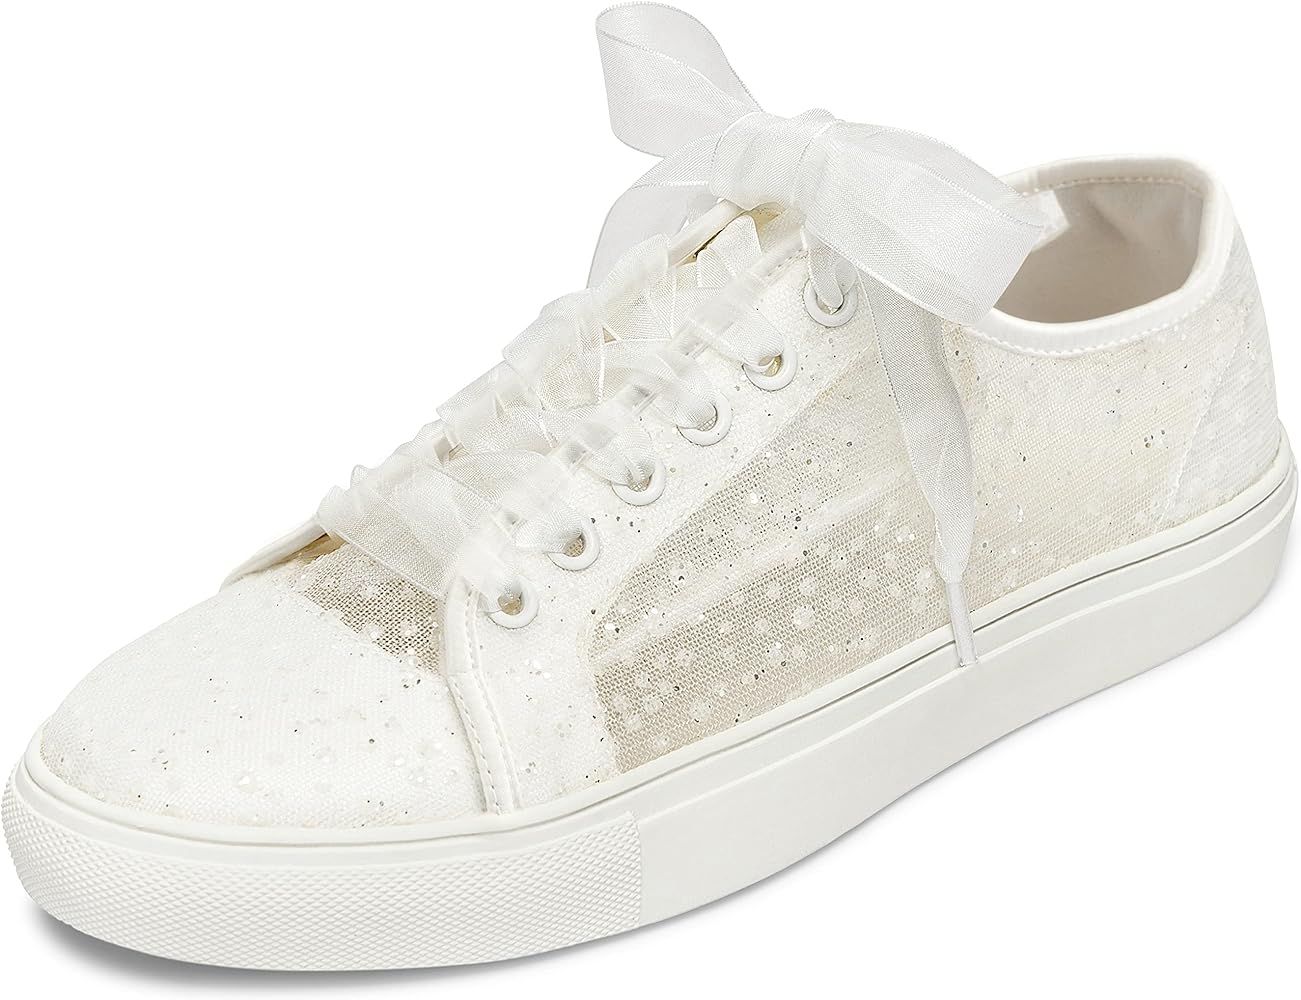 JIAJIA 8832A Wedding Shoes Bridal Sneakers Flats Bride Tennis Shoes Lace Sneakers | Amazon (US)